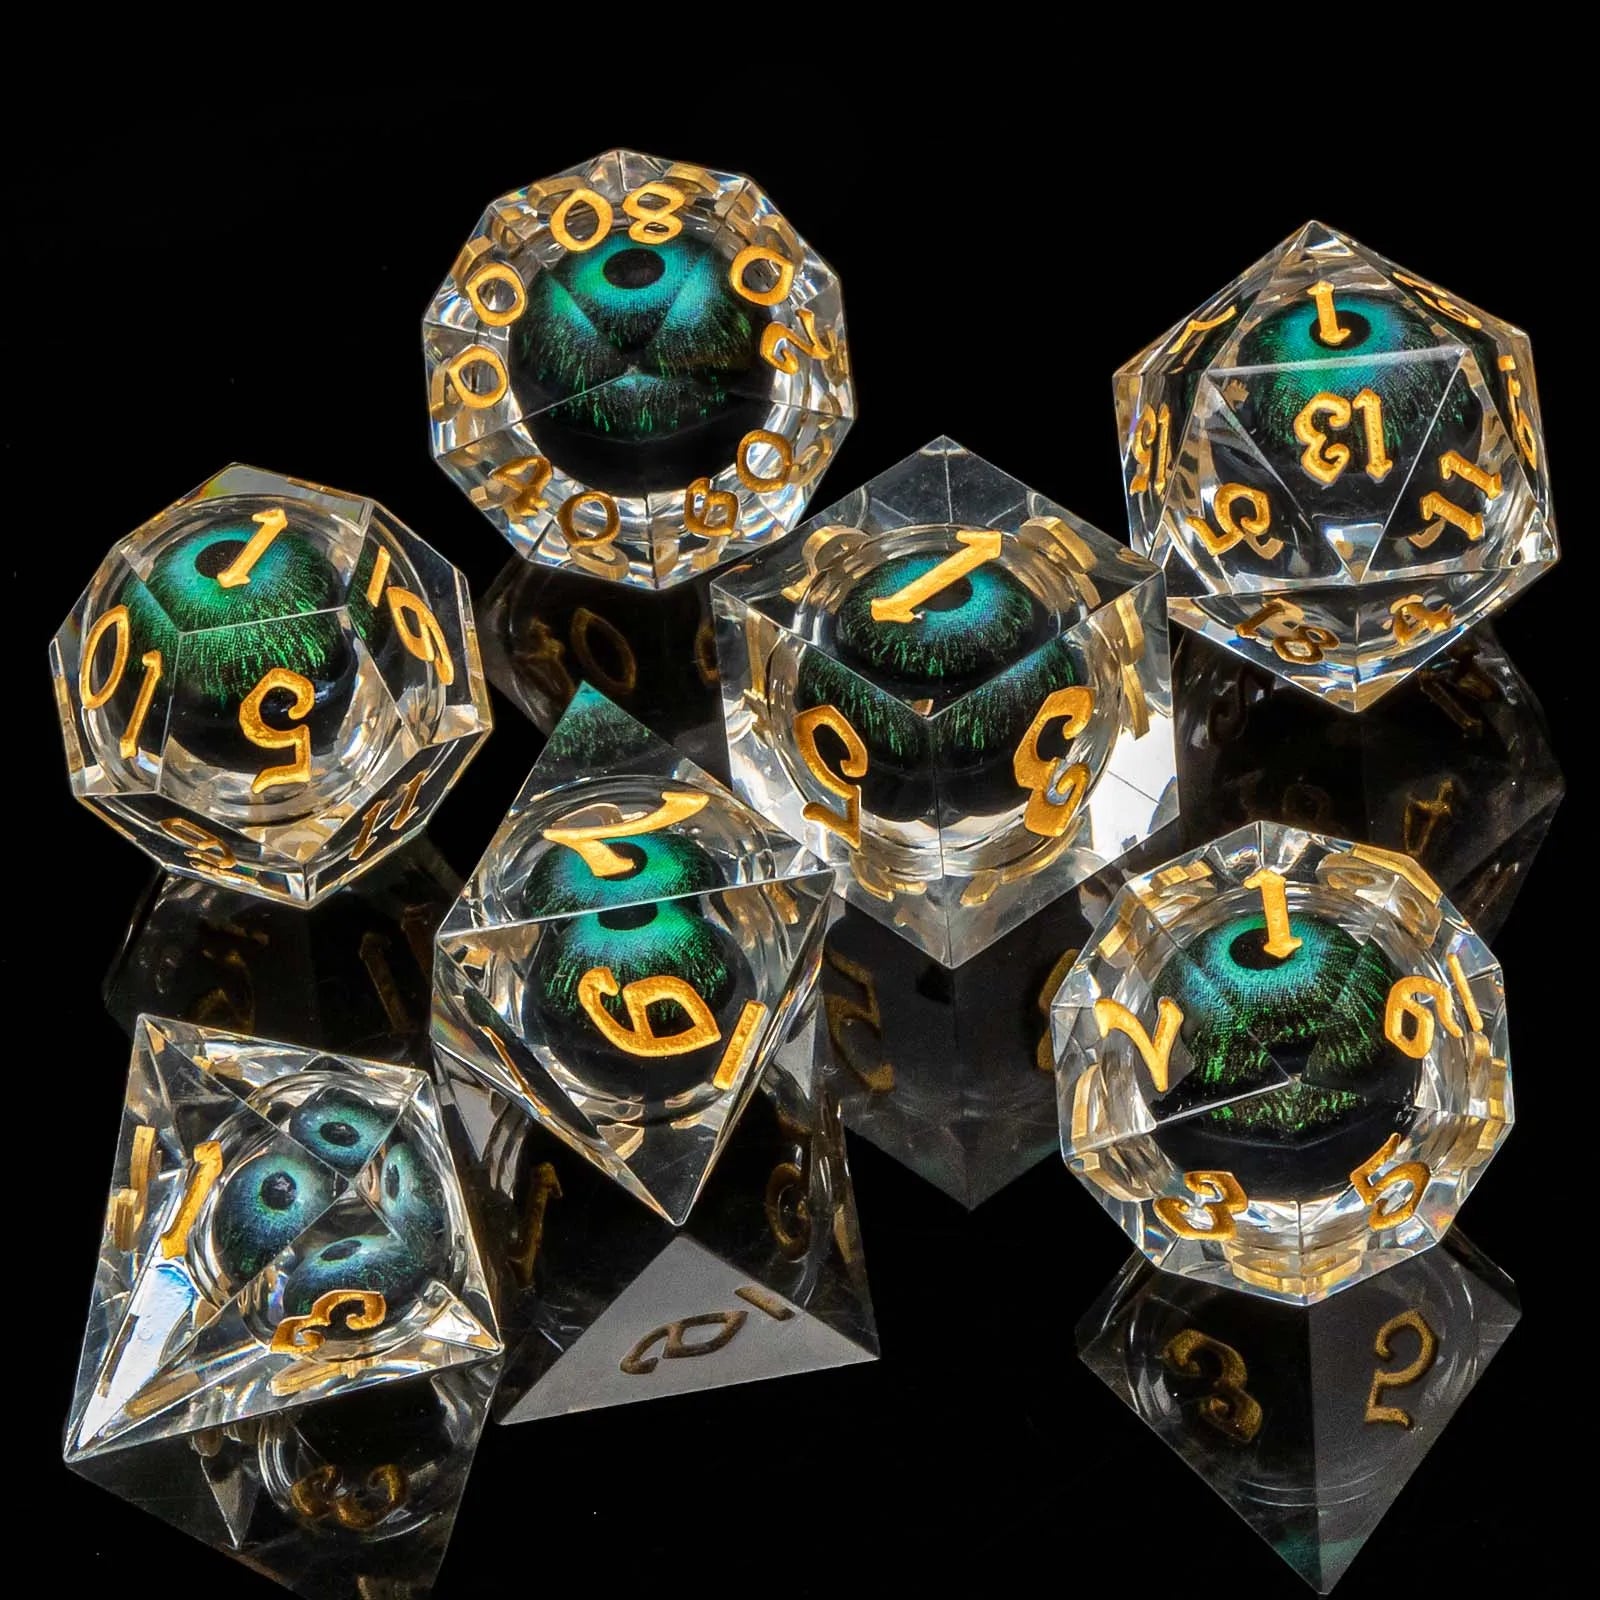 DND Eye Liquid Flow Core Resin D&D Dice Set For D and D Dungeon and Dragon Pathfinder Table Role Playing Game Polyhedral Dice AZ17